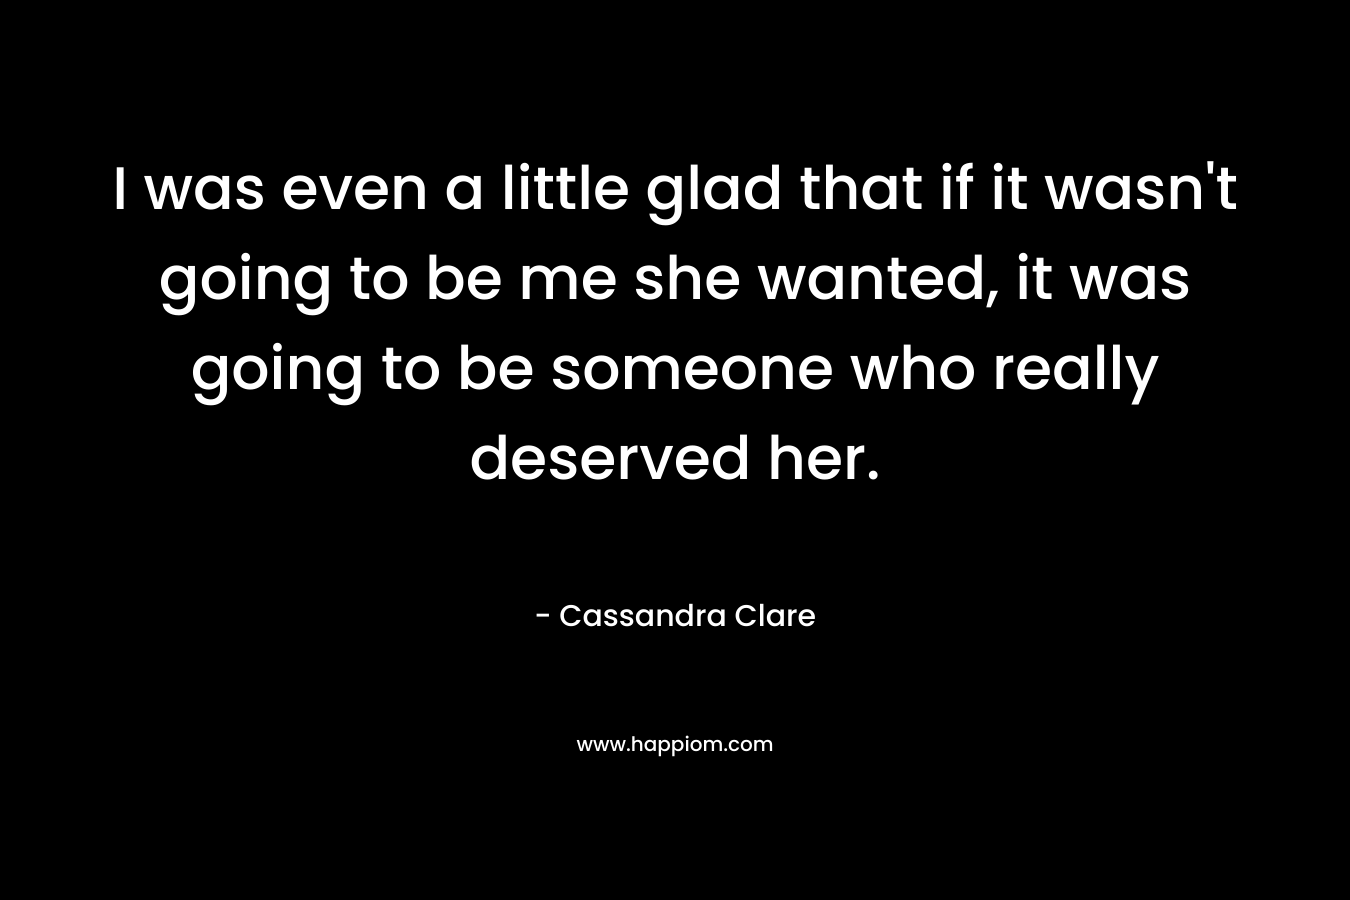 I was even a little glad that if it wasn't going to be me she wanted, it was going to be someone who really deserved her.